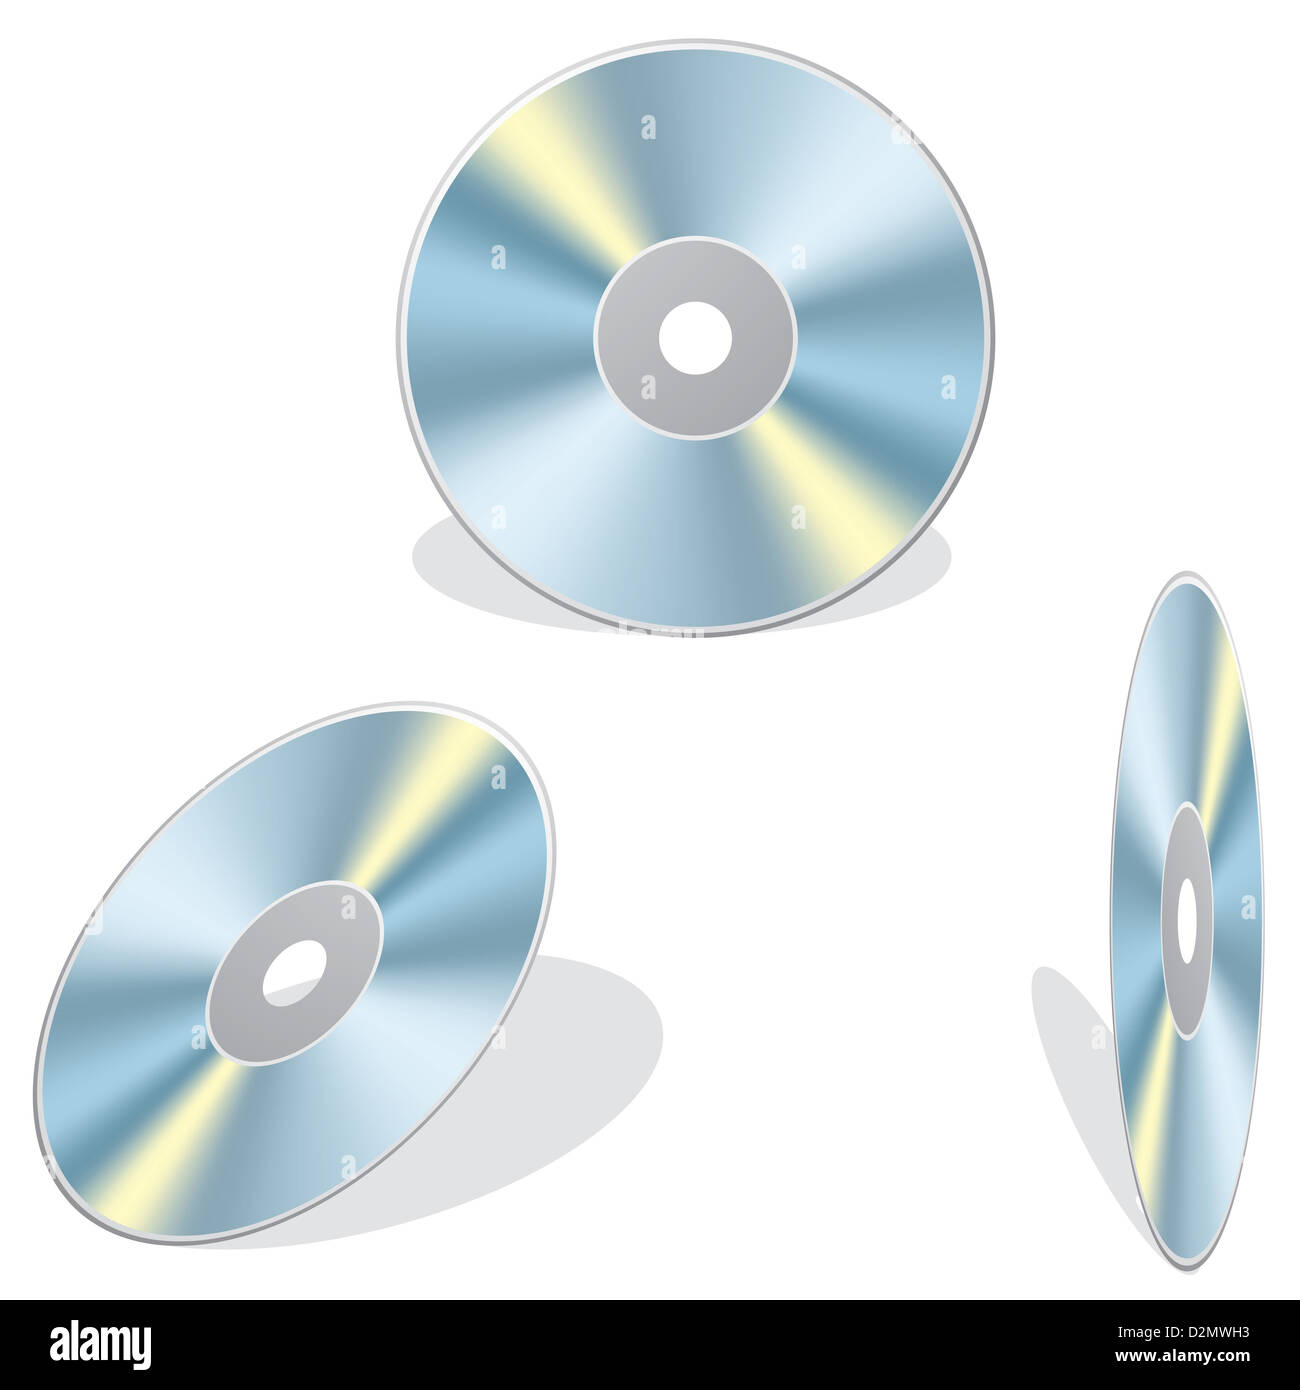 Close-up of compact discs Stock Photo